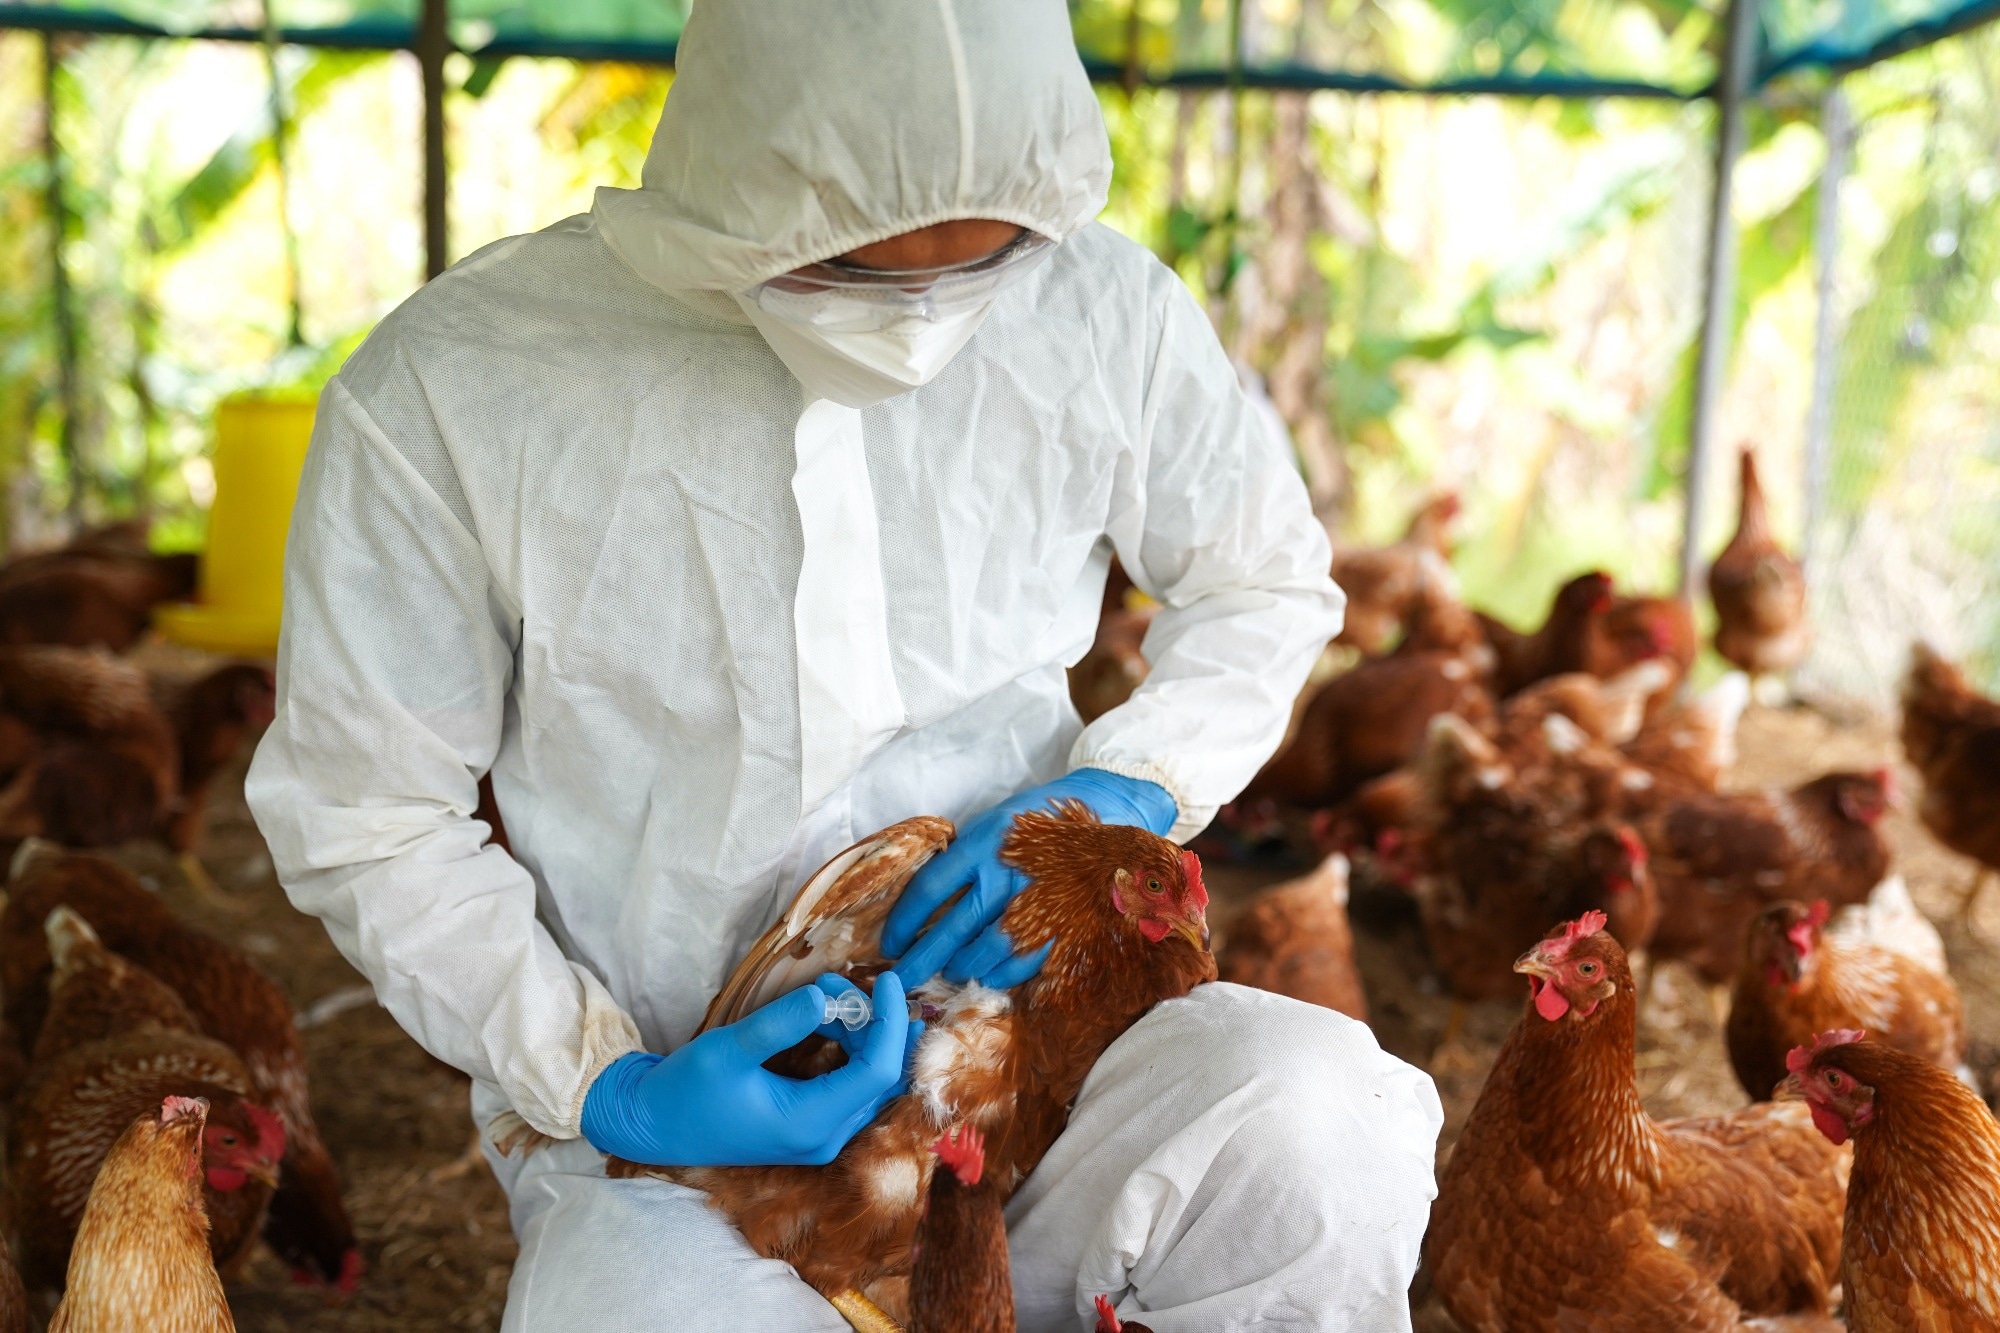 Report: Drivers for a pandemic due to avian influenza and options for One Health mitigation measures. Image Credit: Pordee_Aomboon / Shutterstock